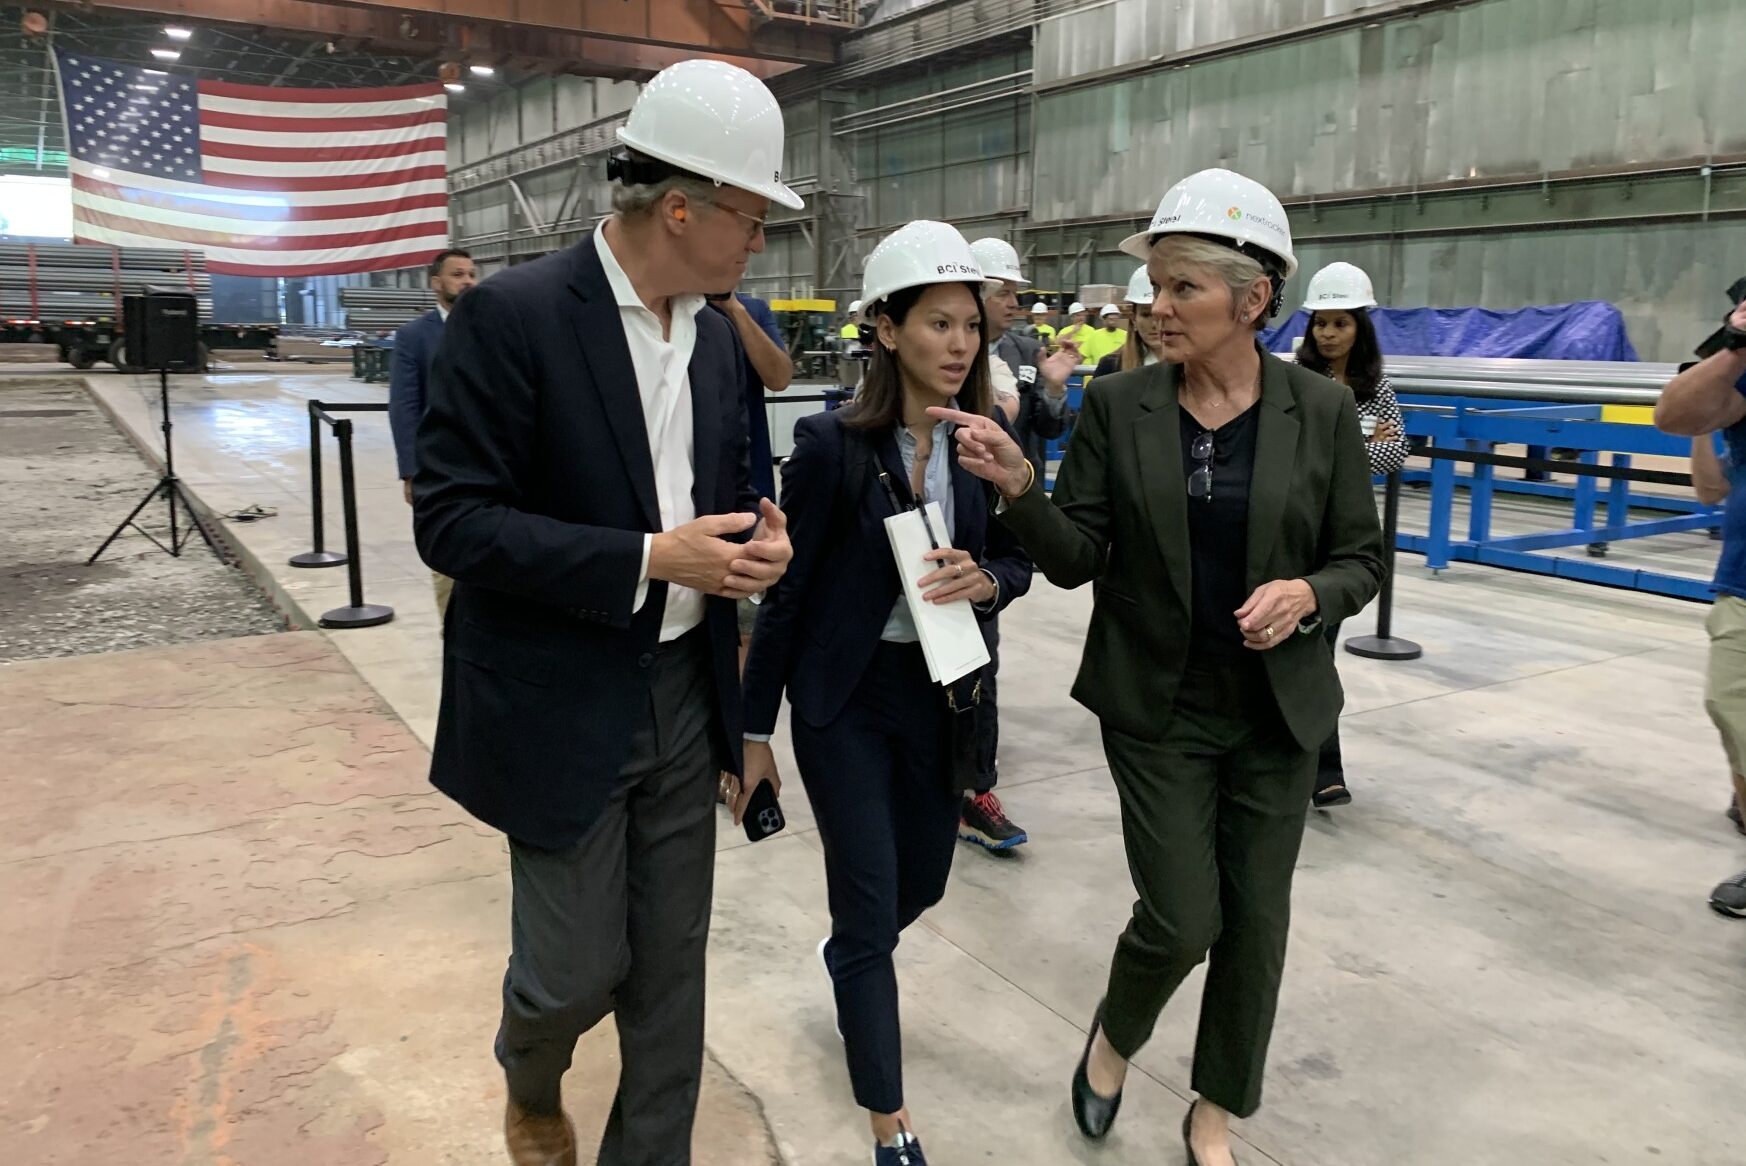 Energy Secretary with workers